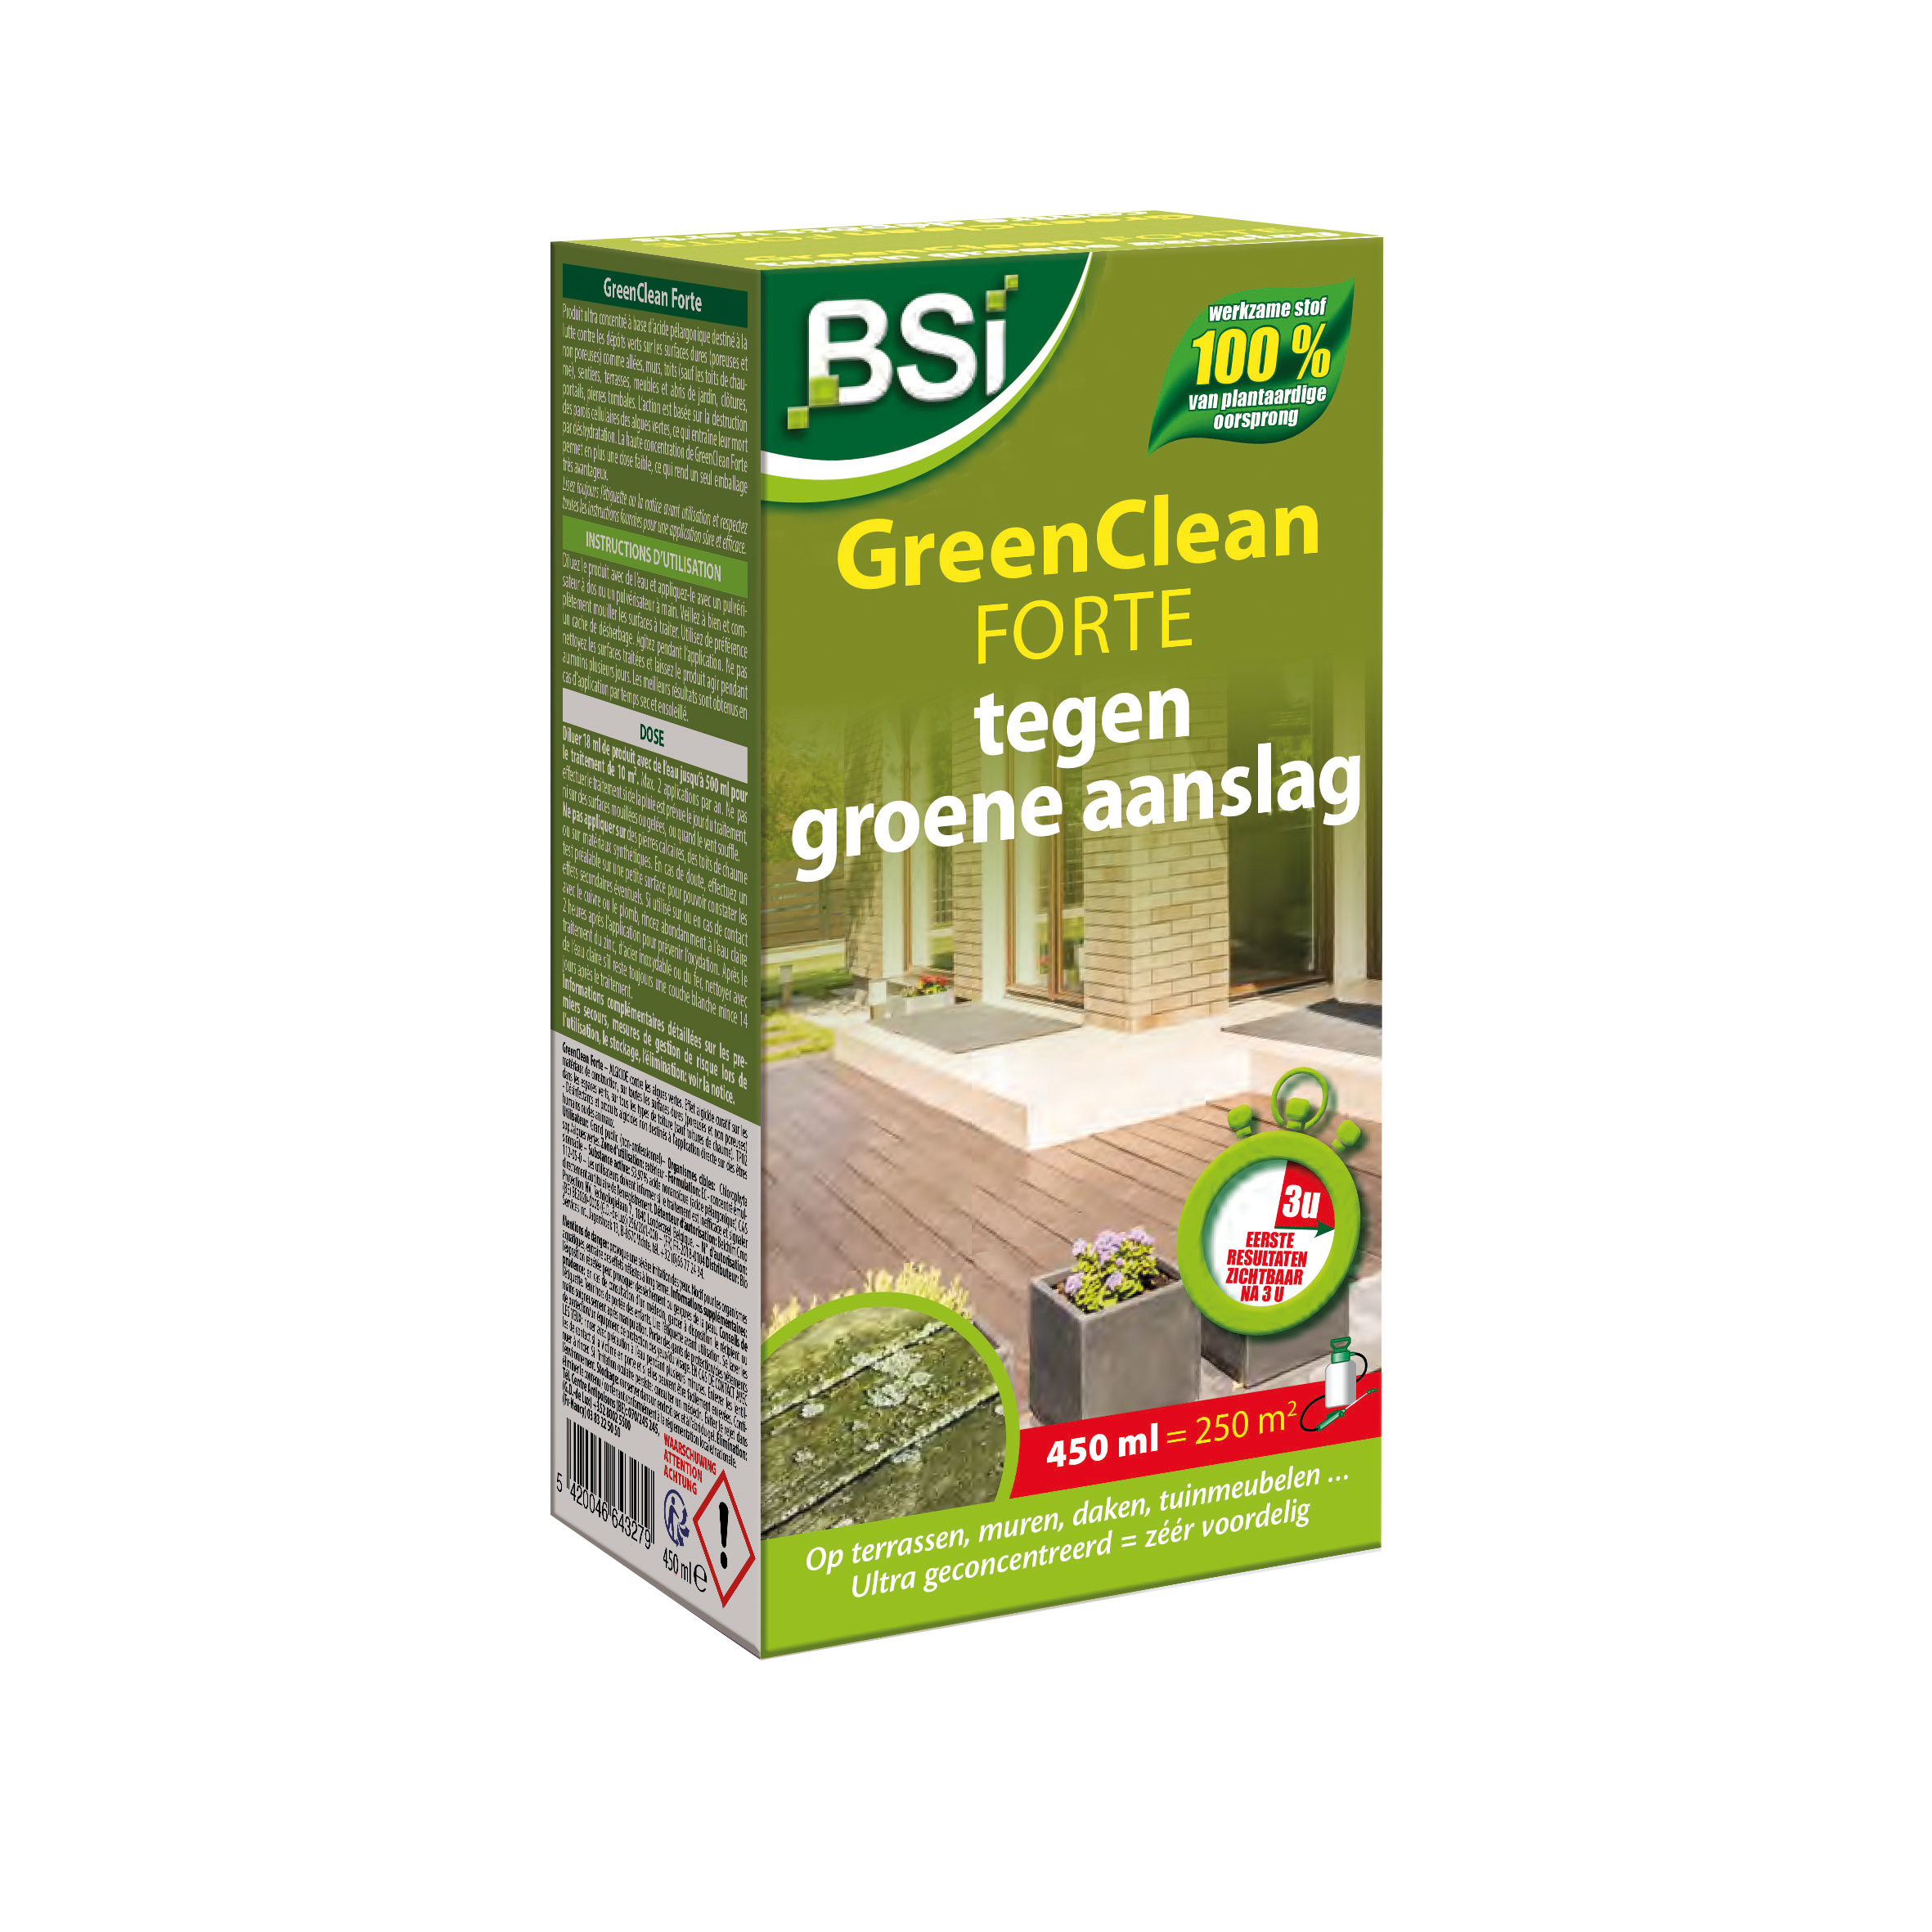 GreenClean Forte (BE2020-0008) - BSI 450 ml image